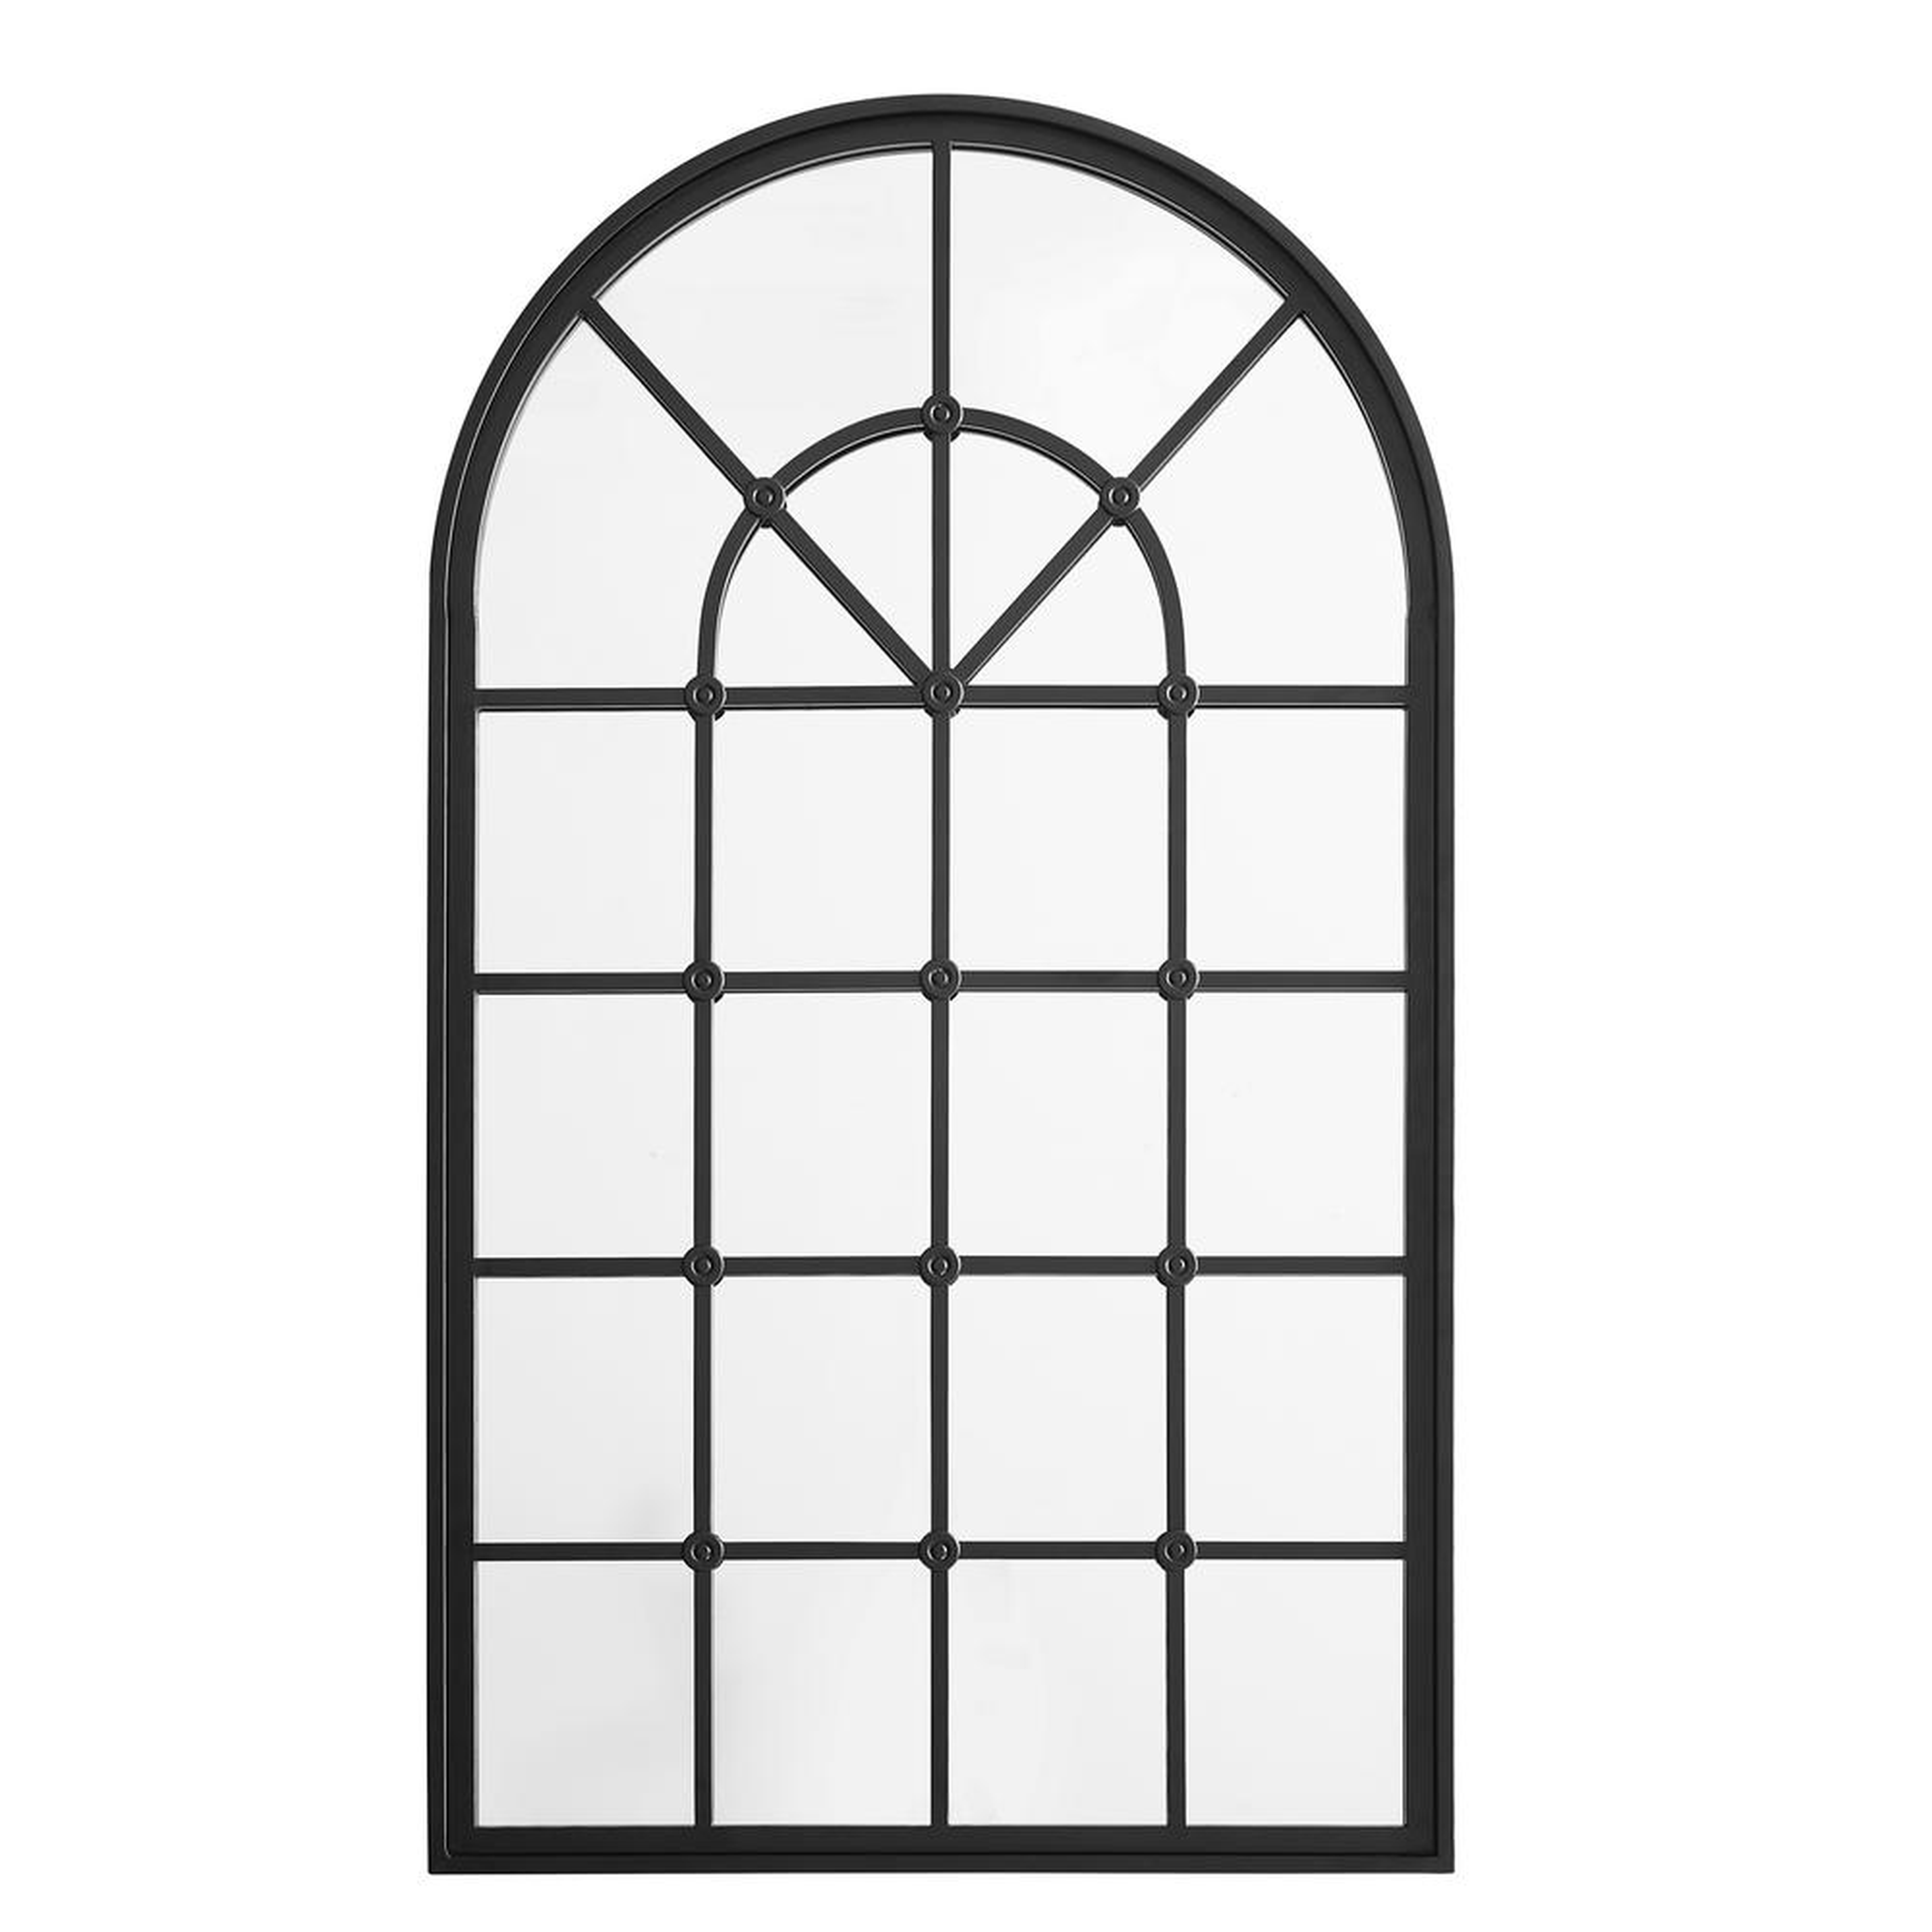 Welwick Designs 50" Arched Windowpane Mirror - Black - Home Depot